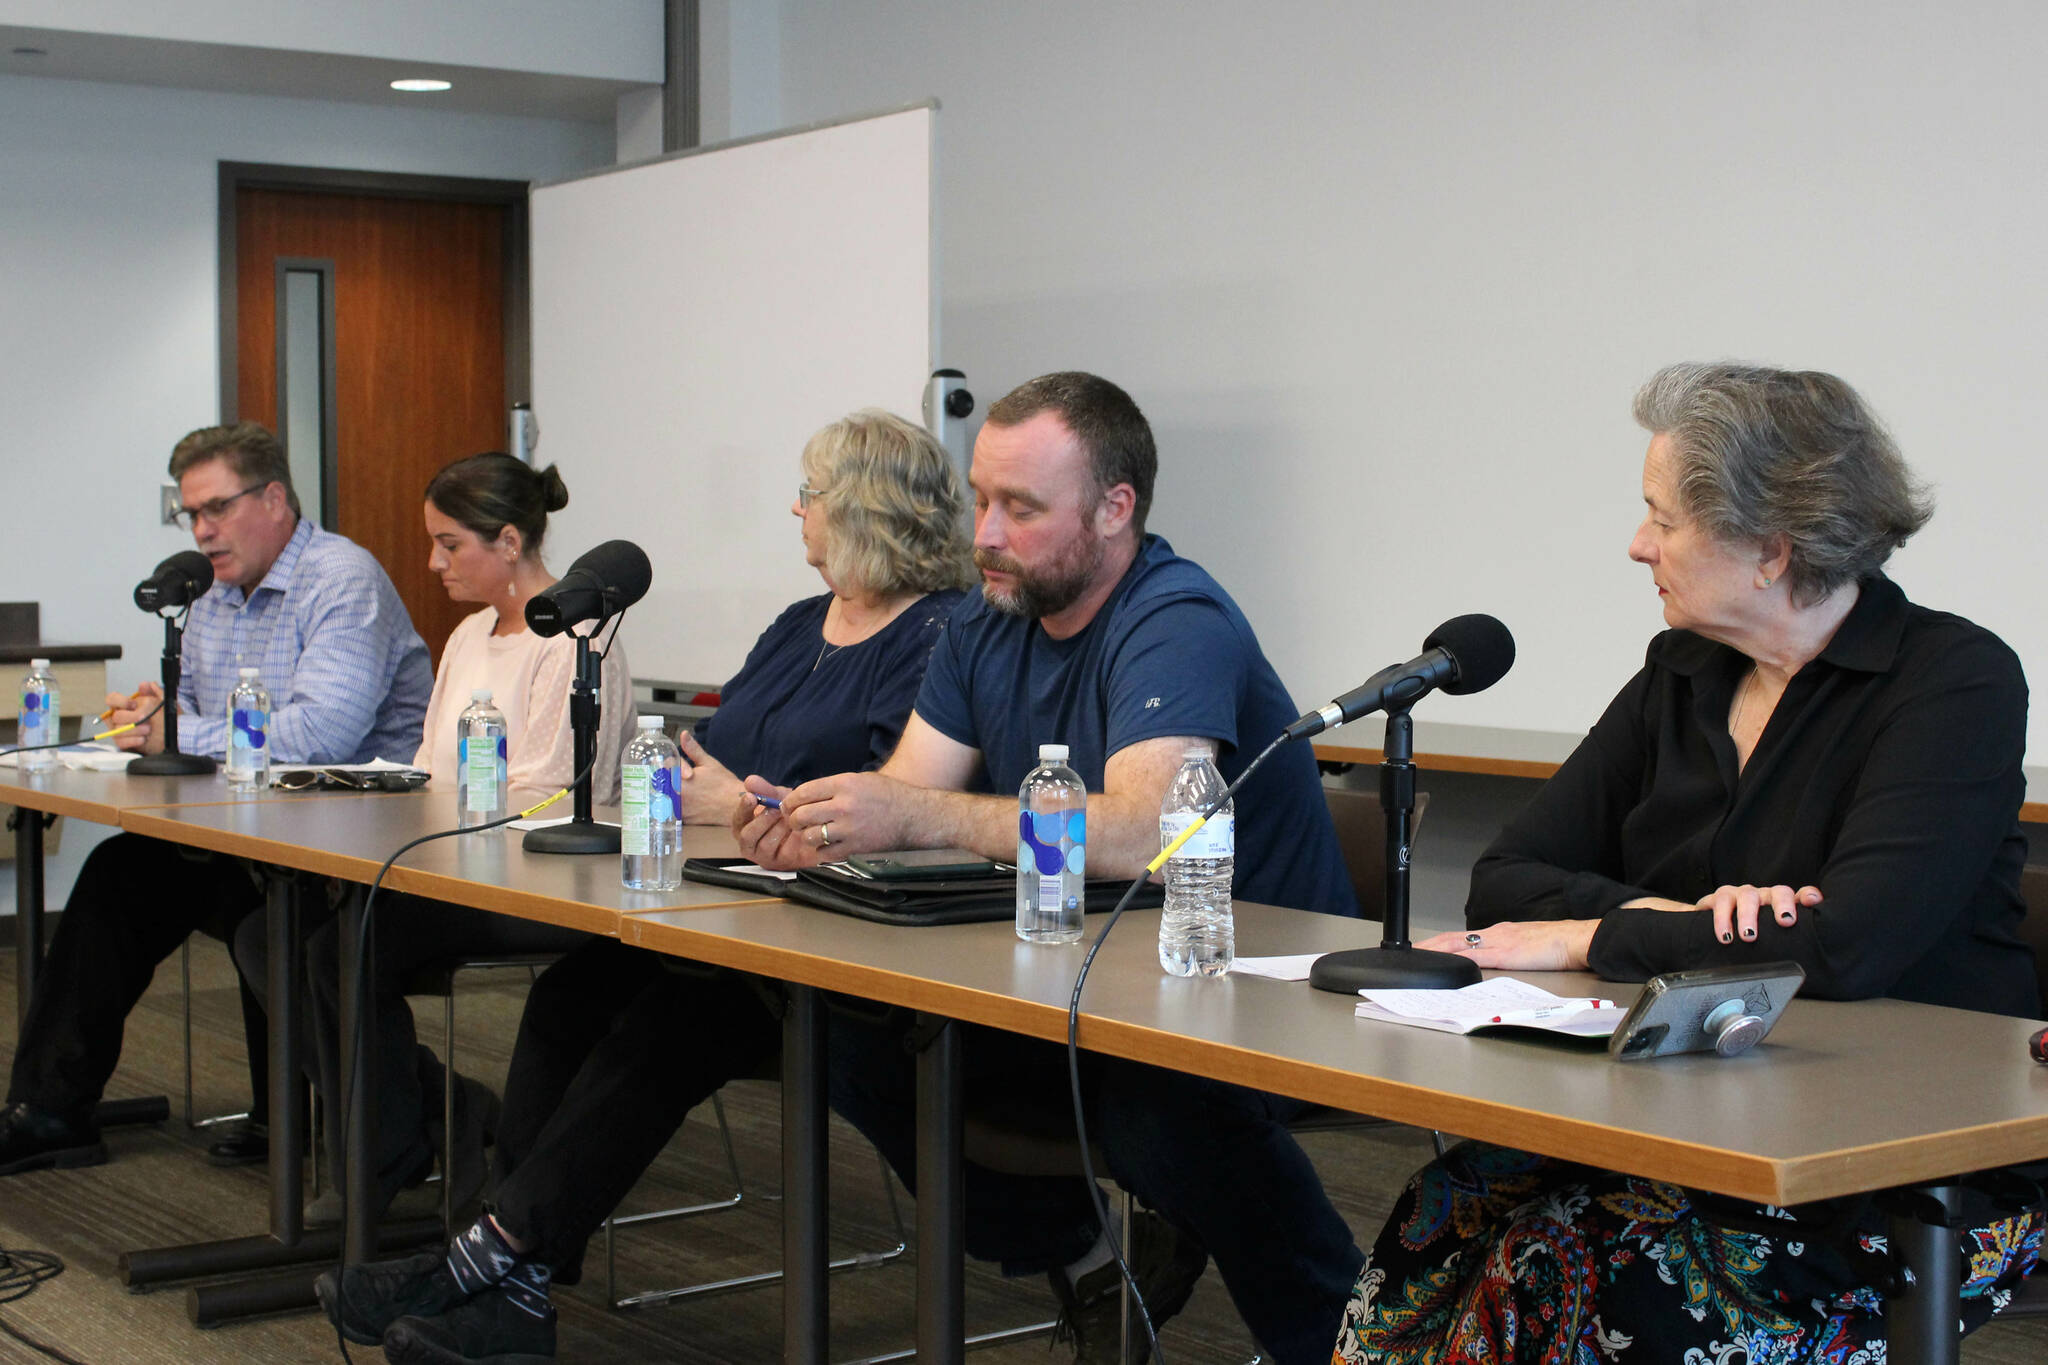 From left, Kenai city mayoral candidates Brian Gabriel and Teea Winger, as well as council candidates Victoria Askin, Alex Douthit and Glenese Pettey participate in a candidate forum at the Soldotna Public Library on Monday, Aug. 29, 2022 in Soldotna, Alaska. The Peninsula Clarion and KDLL 91.9 FM, in partnership with the Central Kenai Peninsula League of Women Voters are hosting a series of election forums Mondays from 6-7 p.m. through Oct. 31 at the Soldotna library. (Ashlyn O’Hara/Peninsula Clarion)